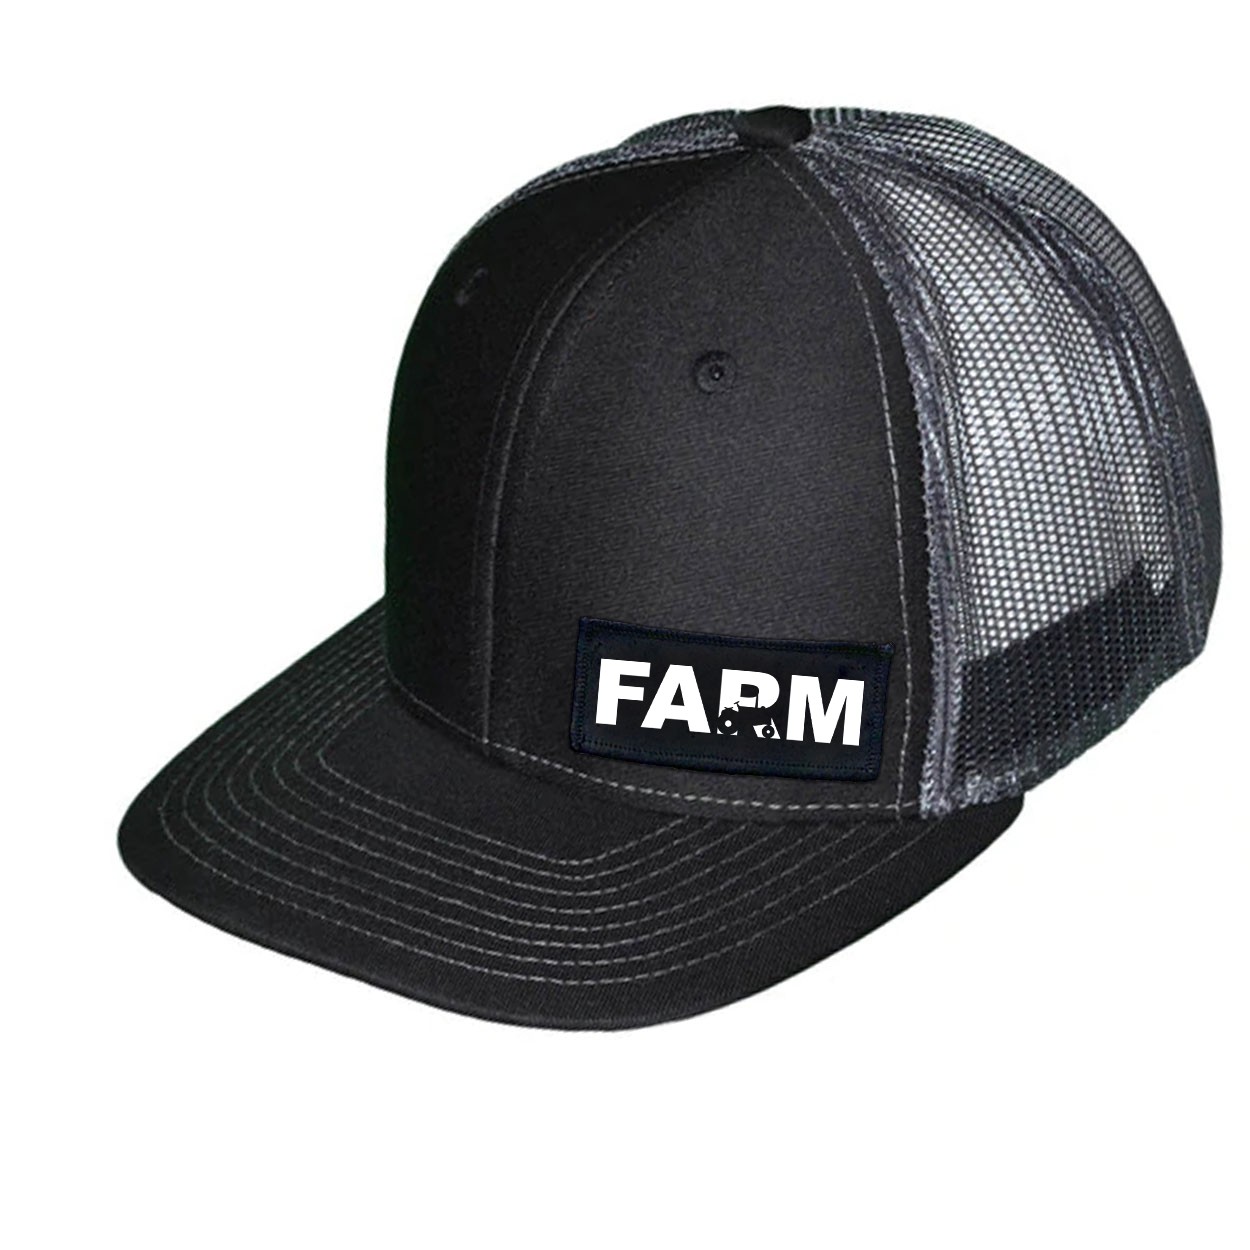 Farm Tractor Logo Night Out Woven Patch Snapback Trucker Hat Black/Gray